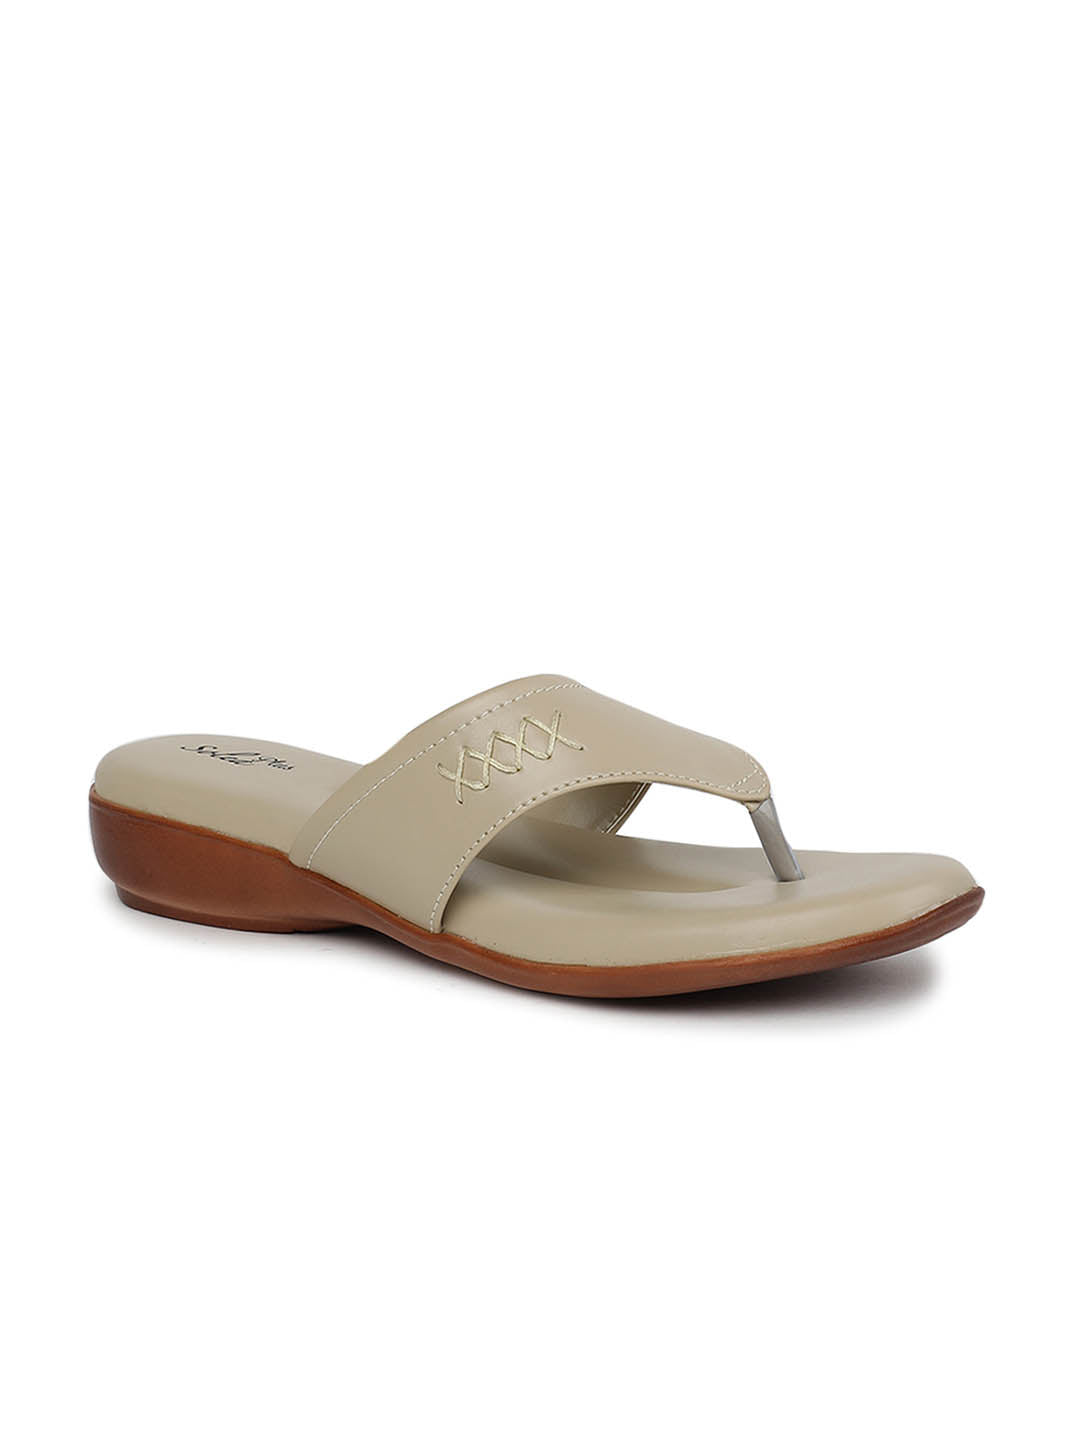 Paragon R10547L Women Sandals | Casual &amp; Formal Sandals | Stylish, Comfortable &amp; Durable | For Daily &amp; Occasion Wear